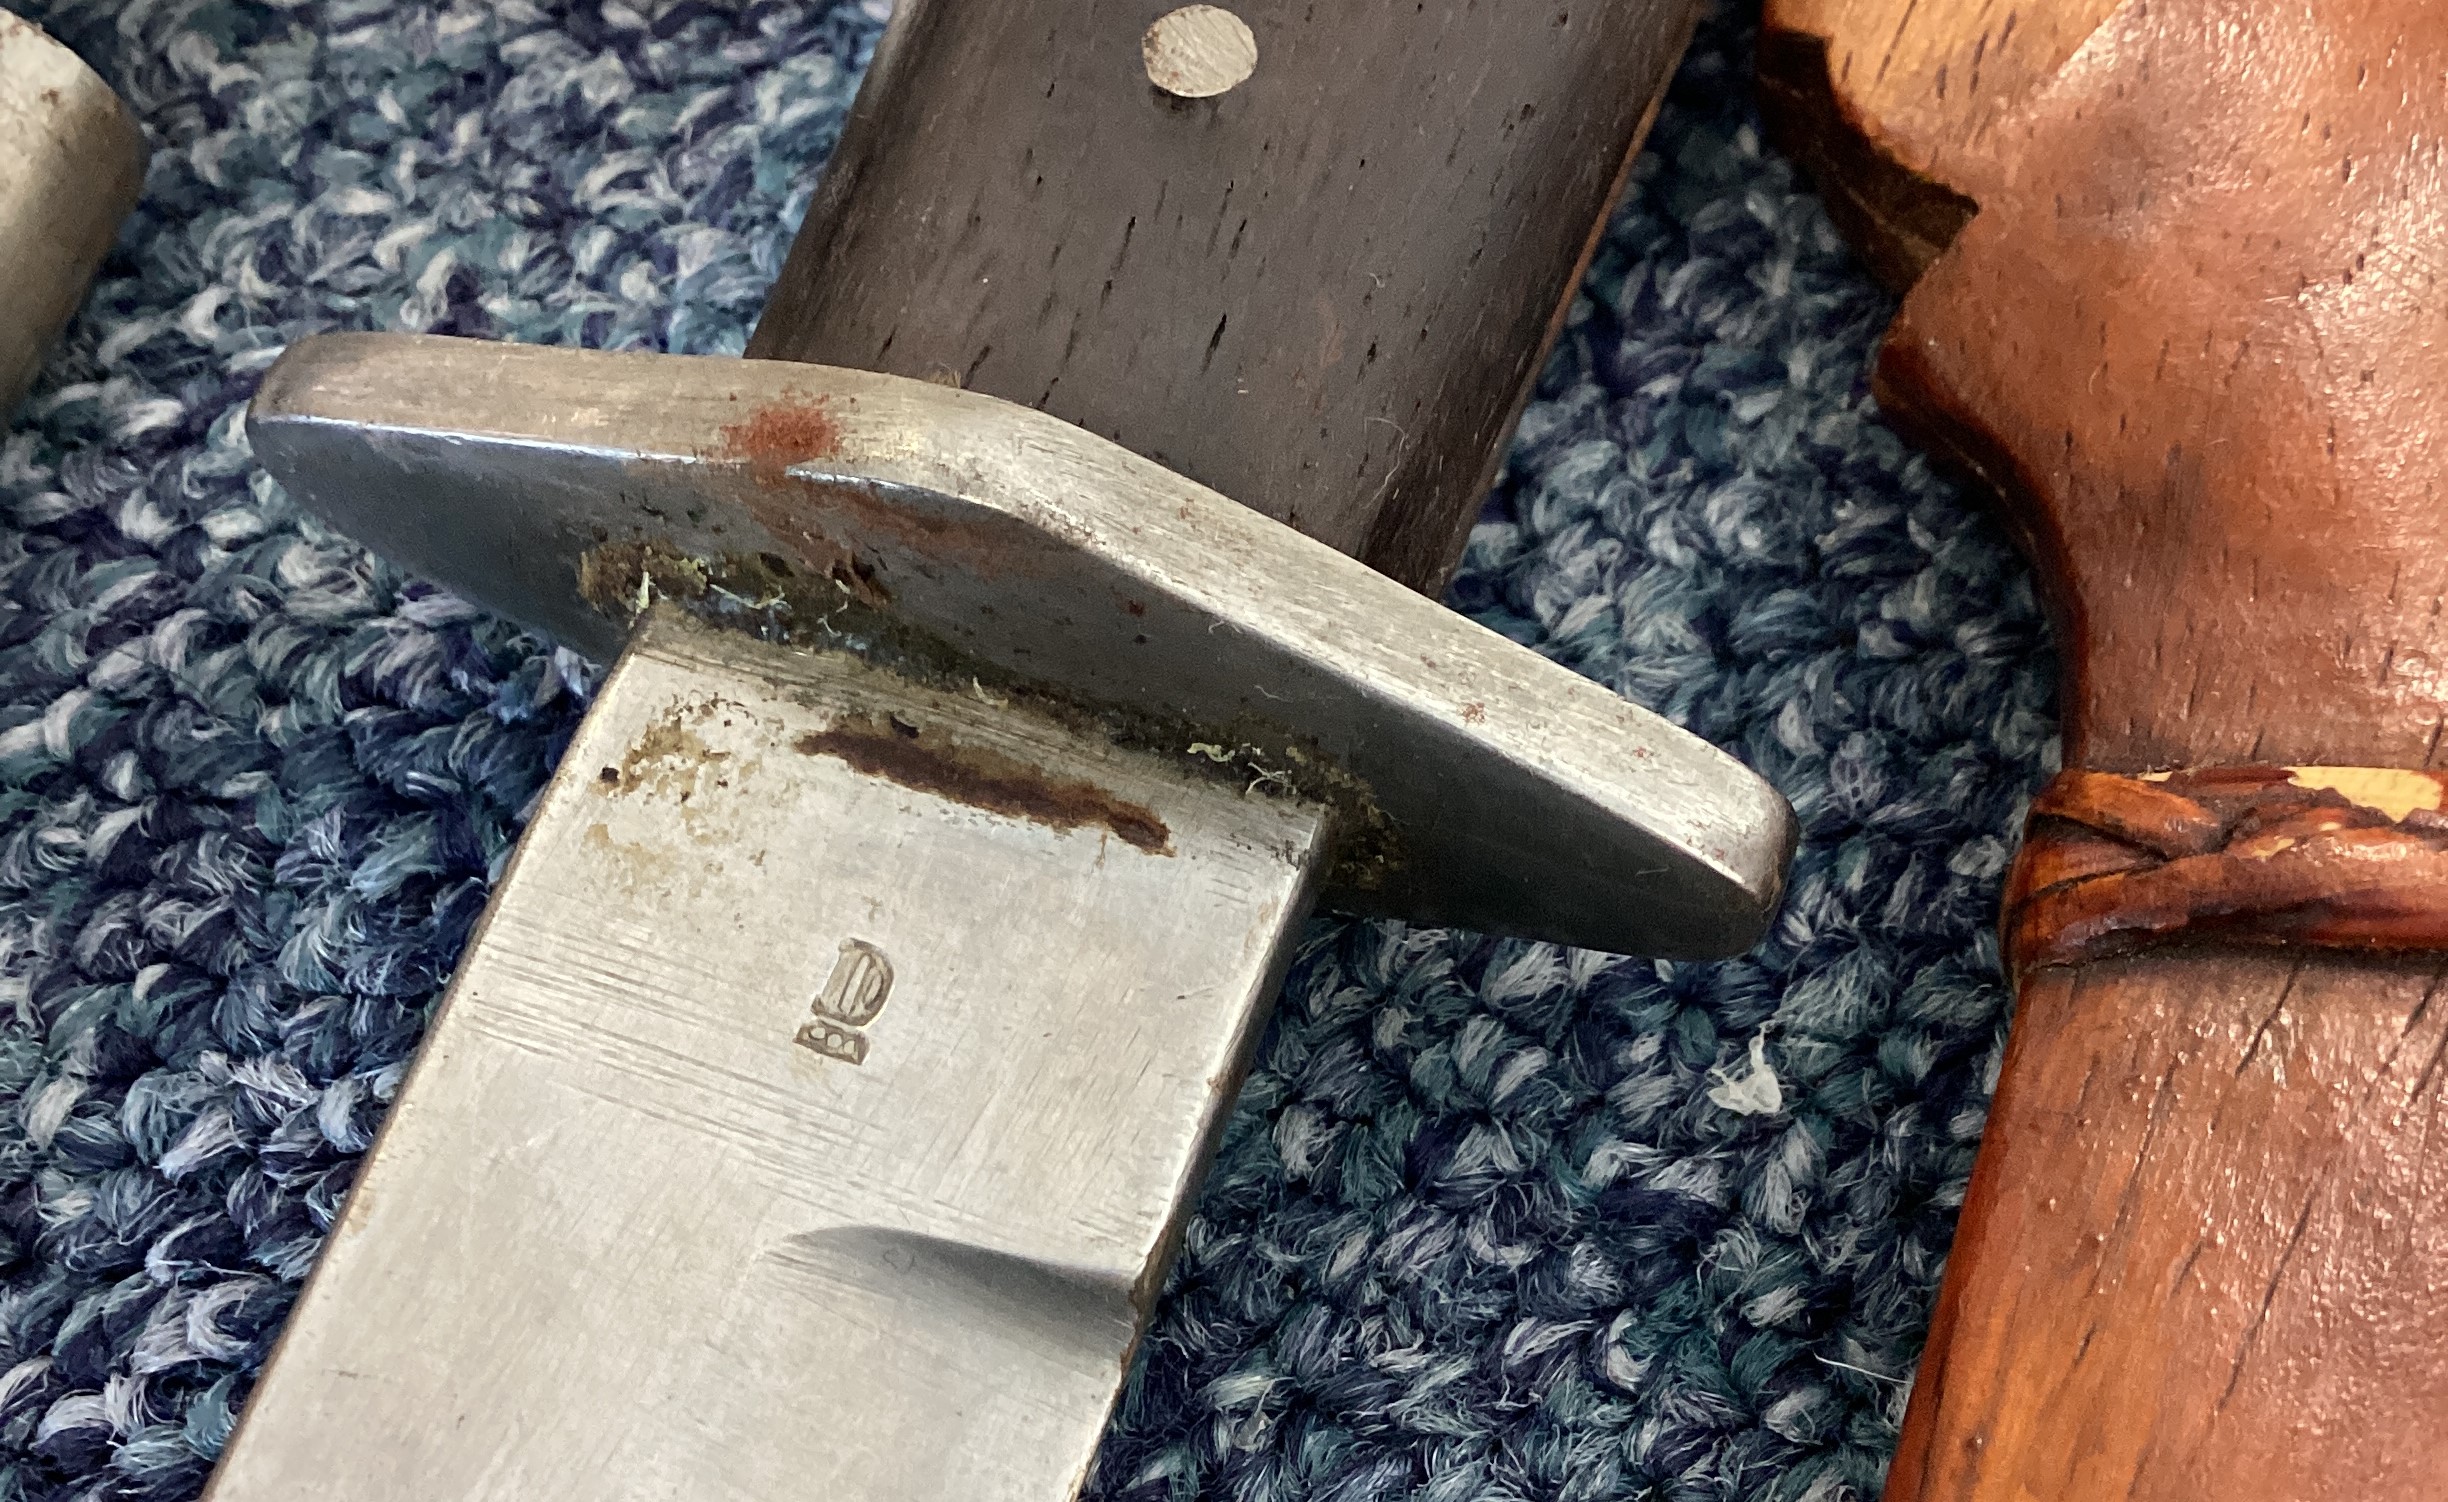 A WW2 knife together with an Eastern dagger. - Image 3 of 3